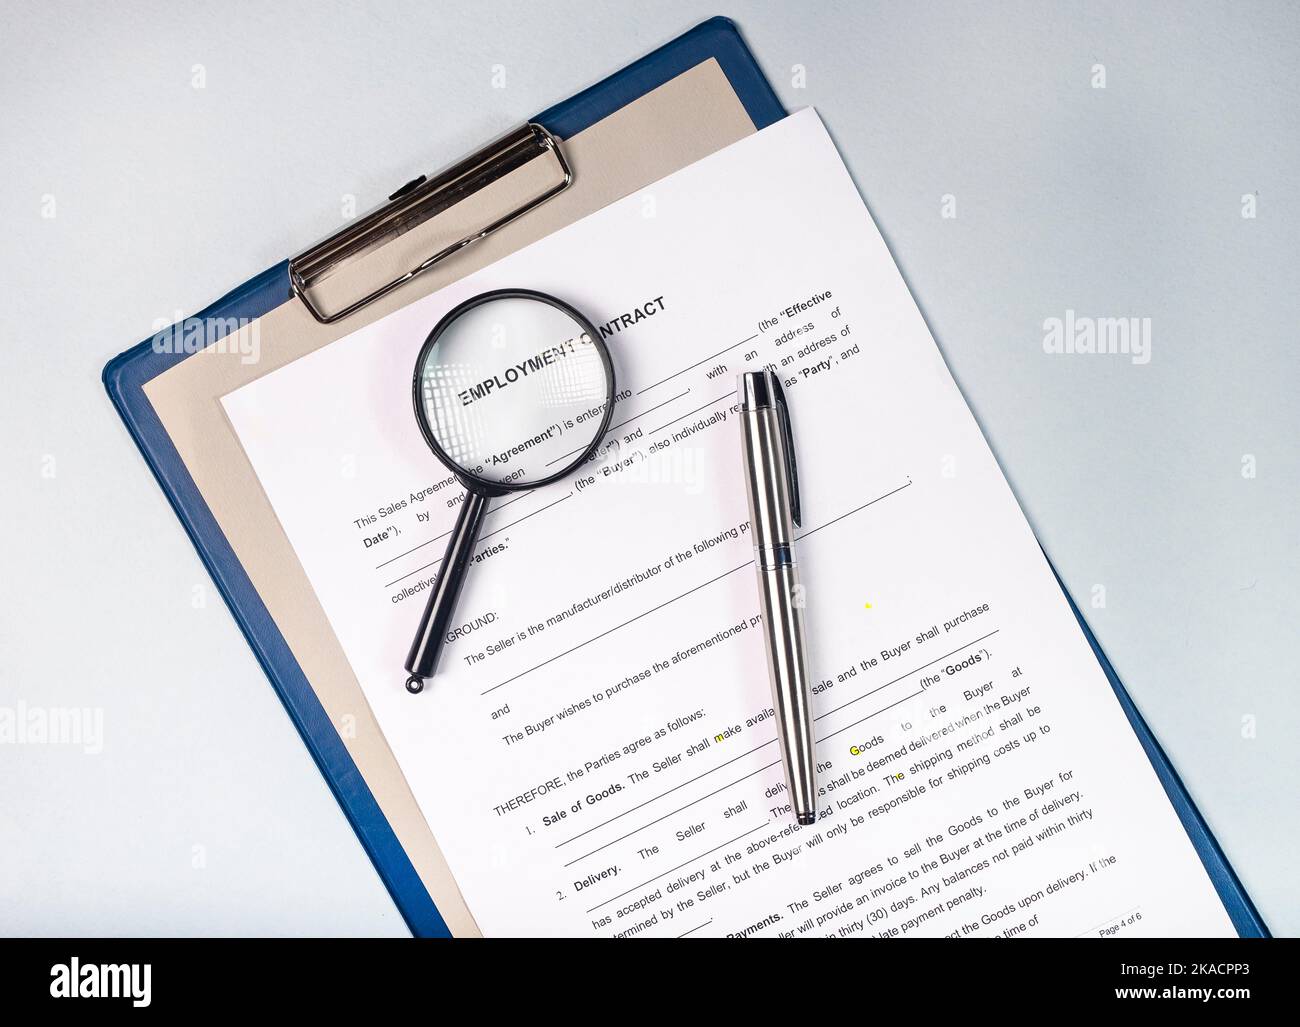 Minsk, Belarus - November 3, 2021 Employment contact studying concept. Stock Photo